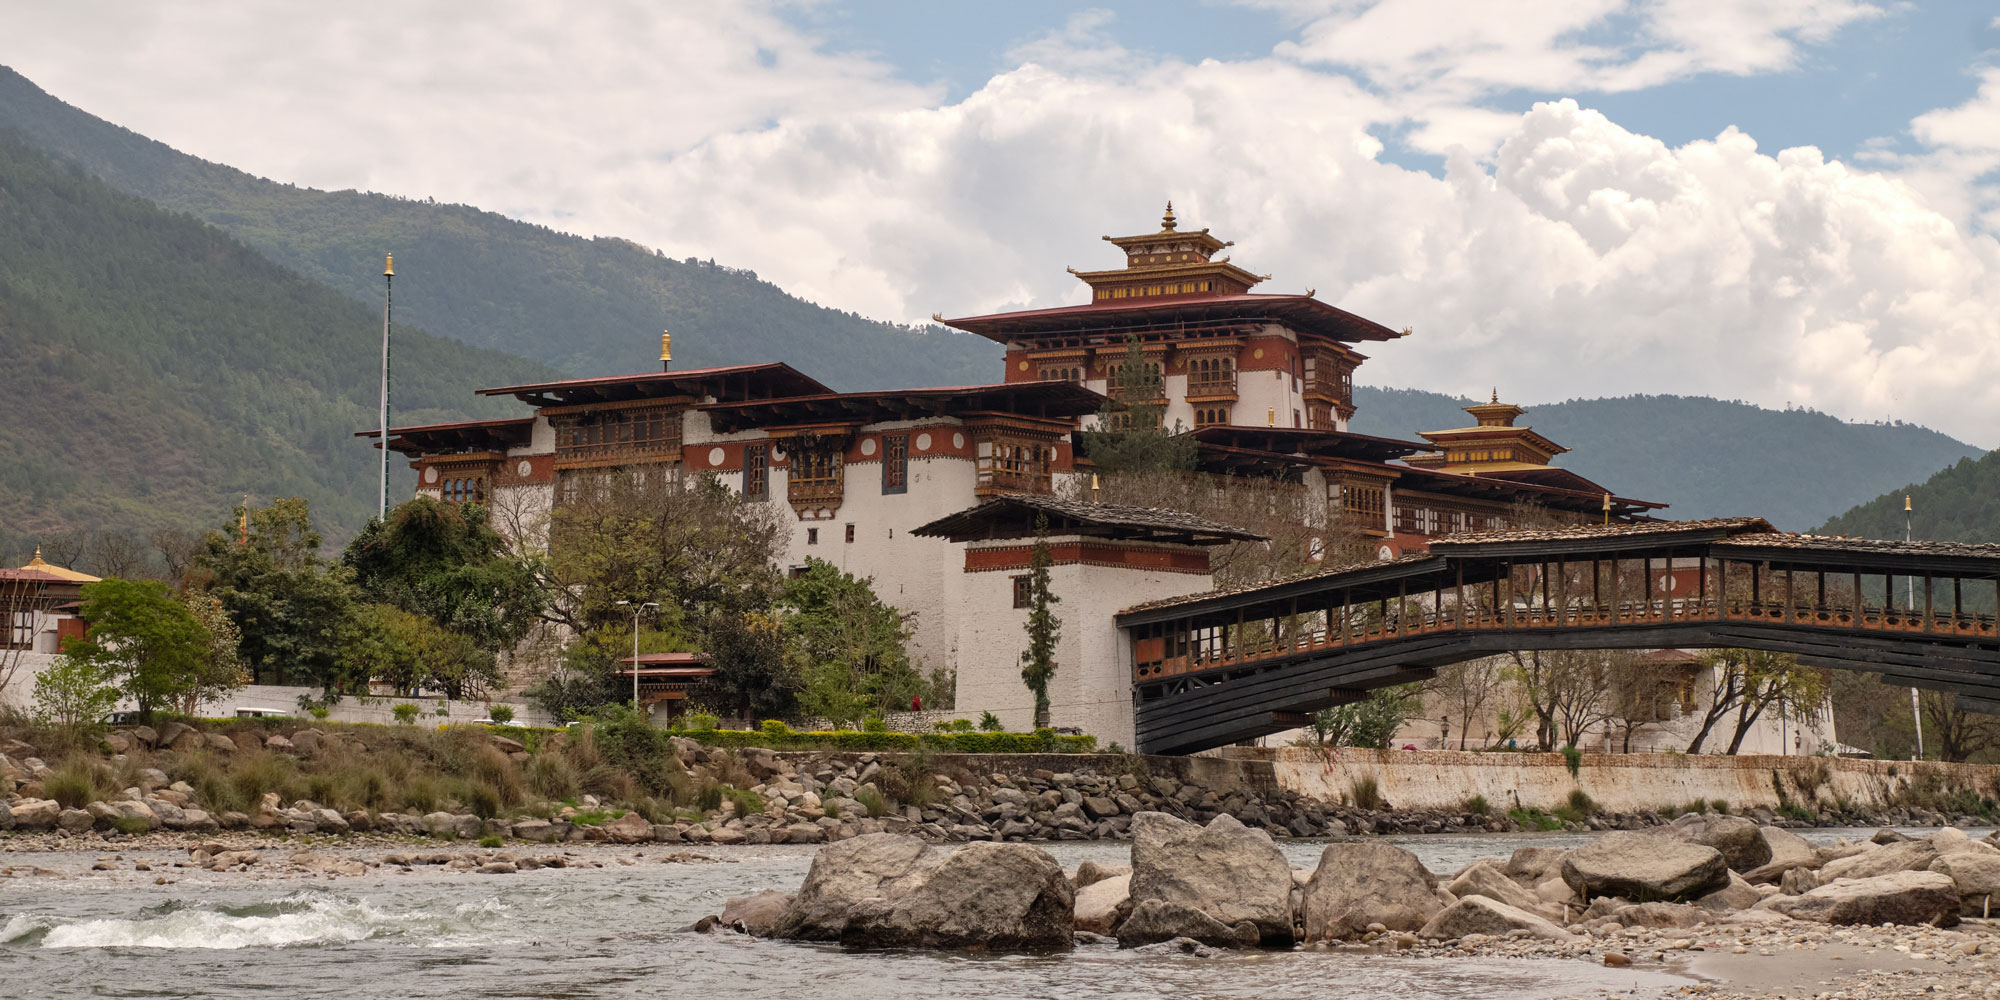 Immerse deep into the unique culture, history & scenic wonders of Bhutan